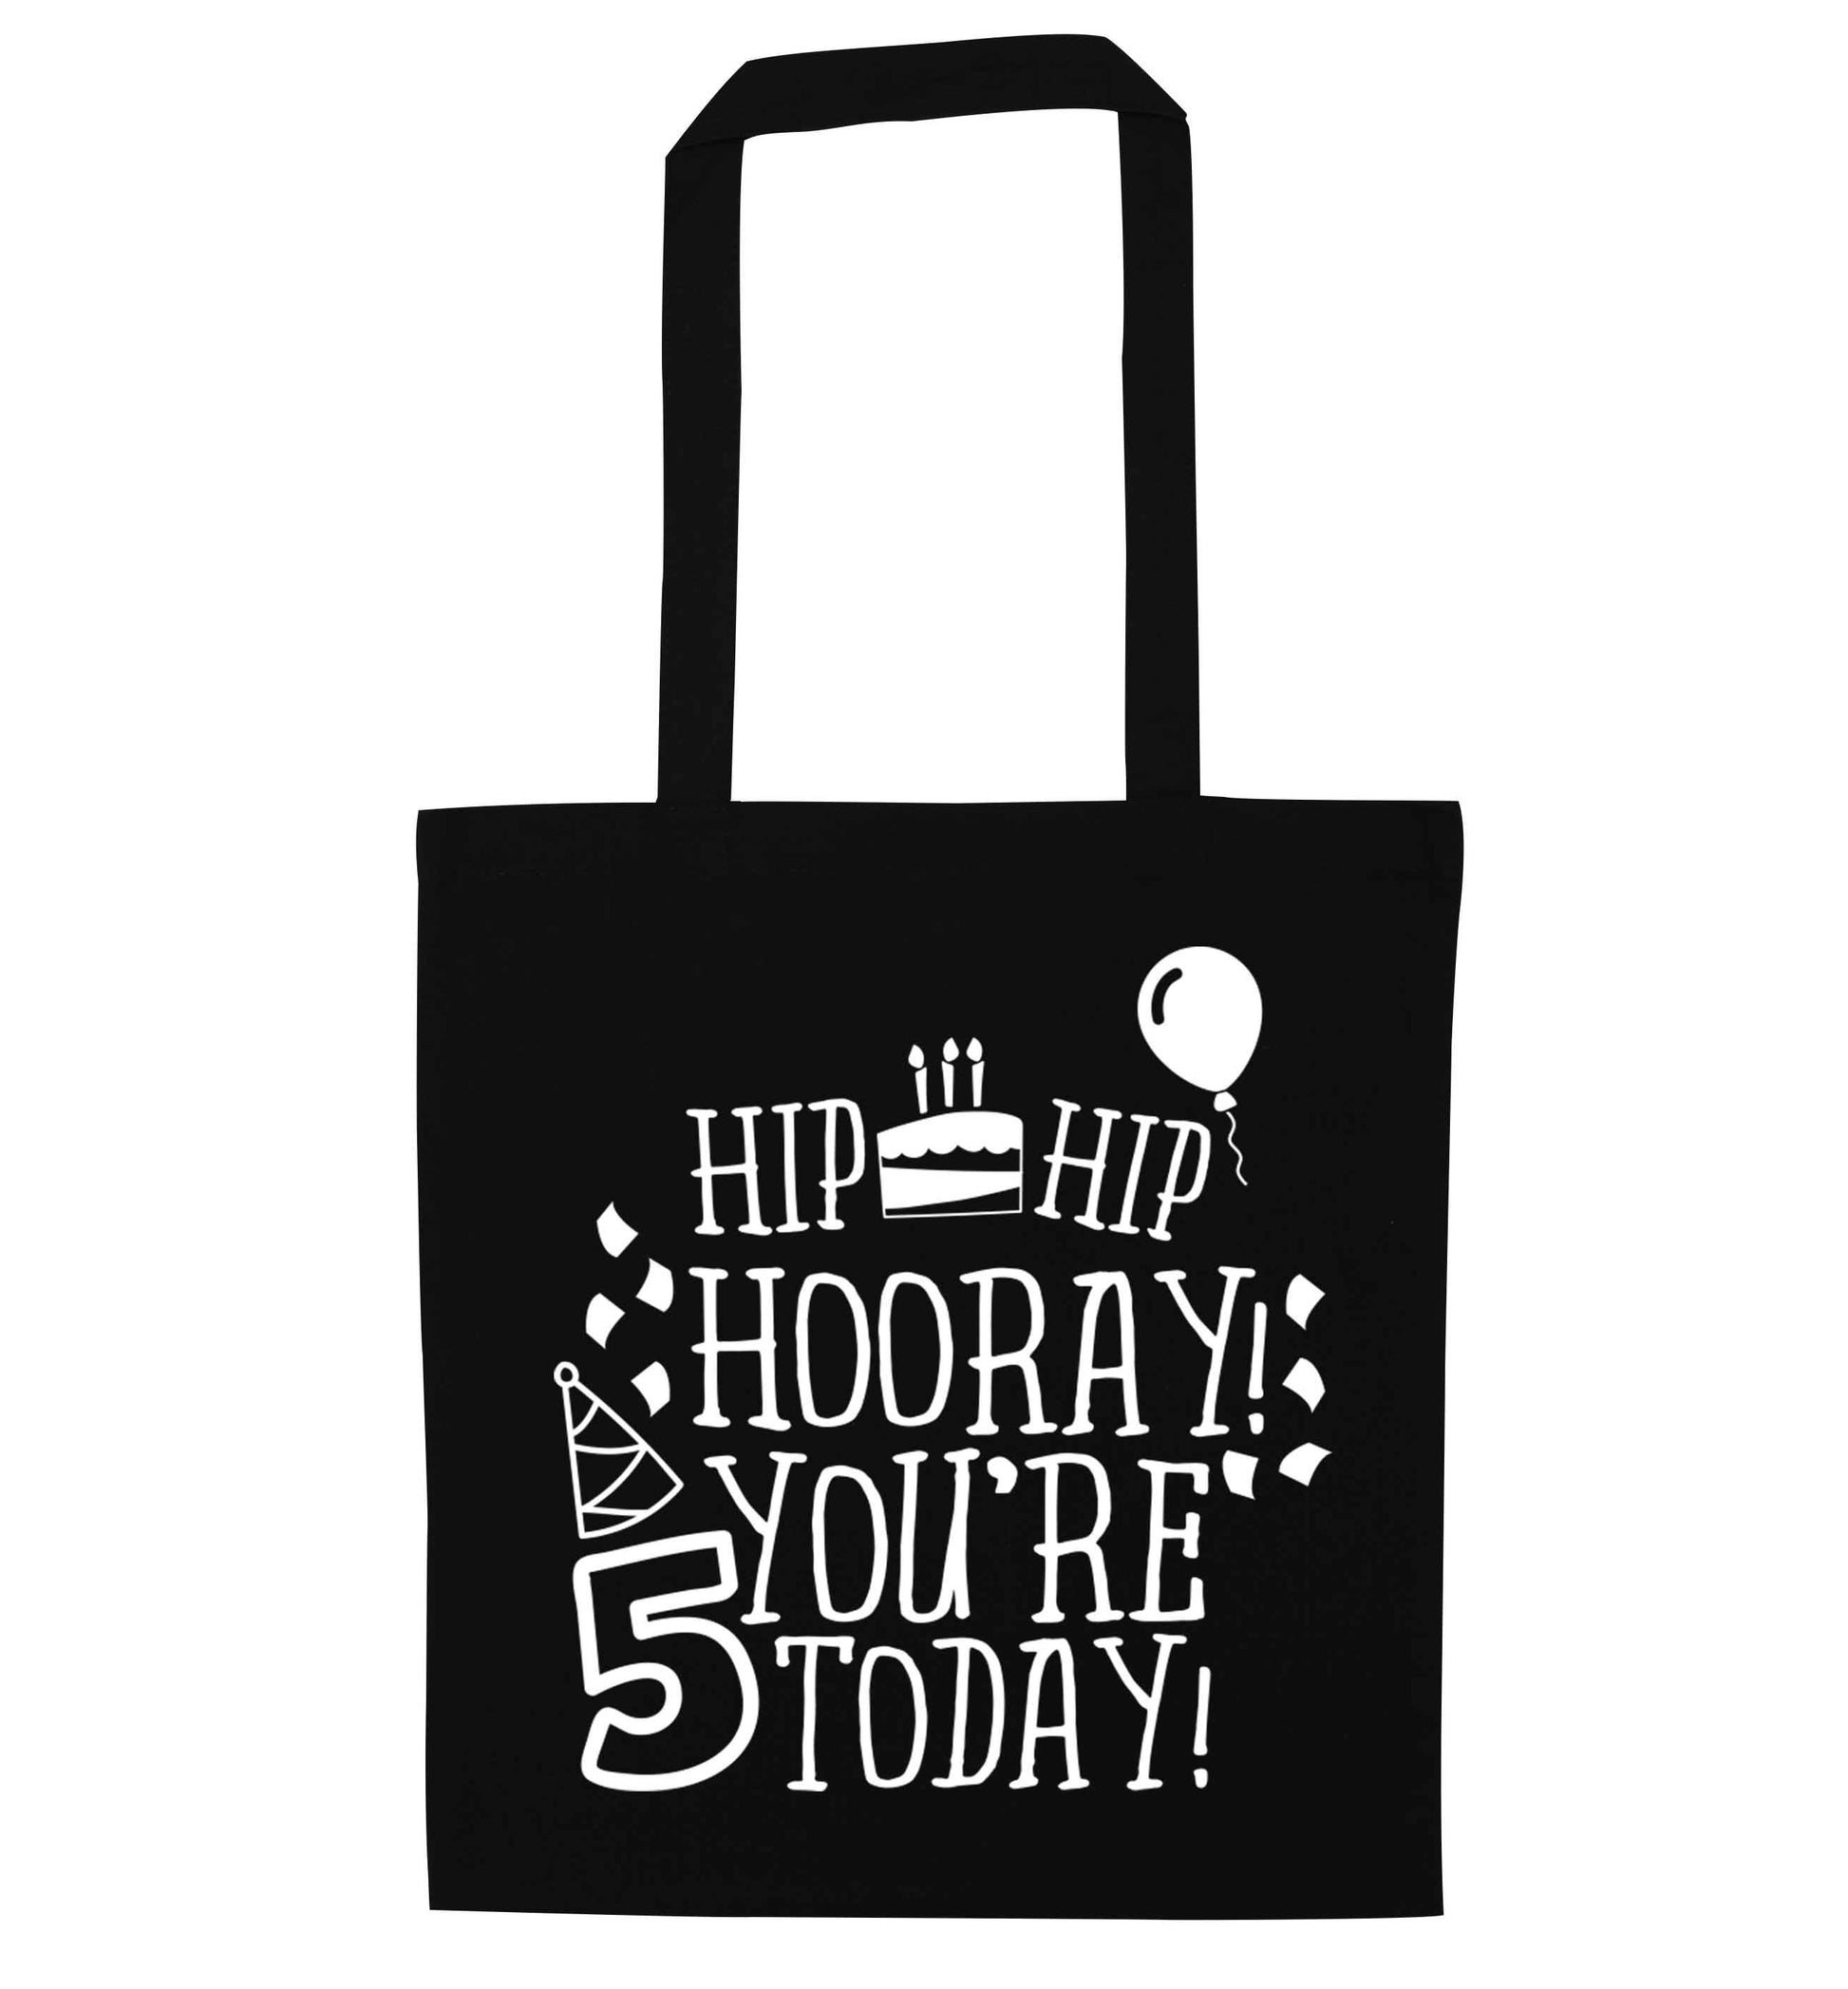 Hip hip hooray you're five today! black tote bag